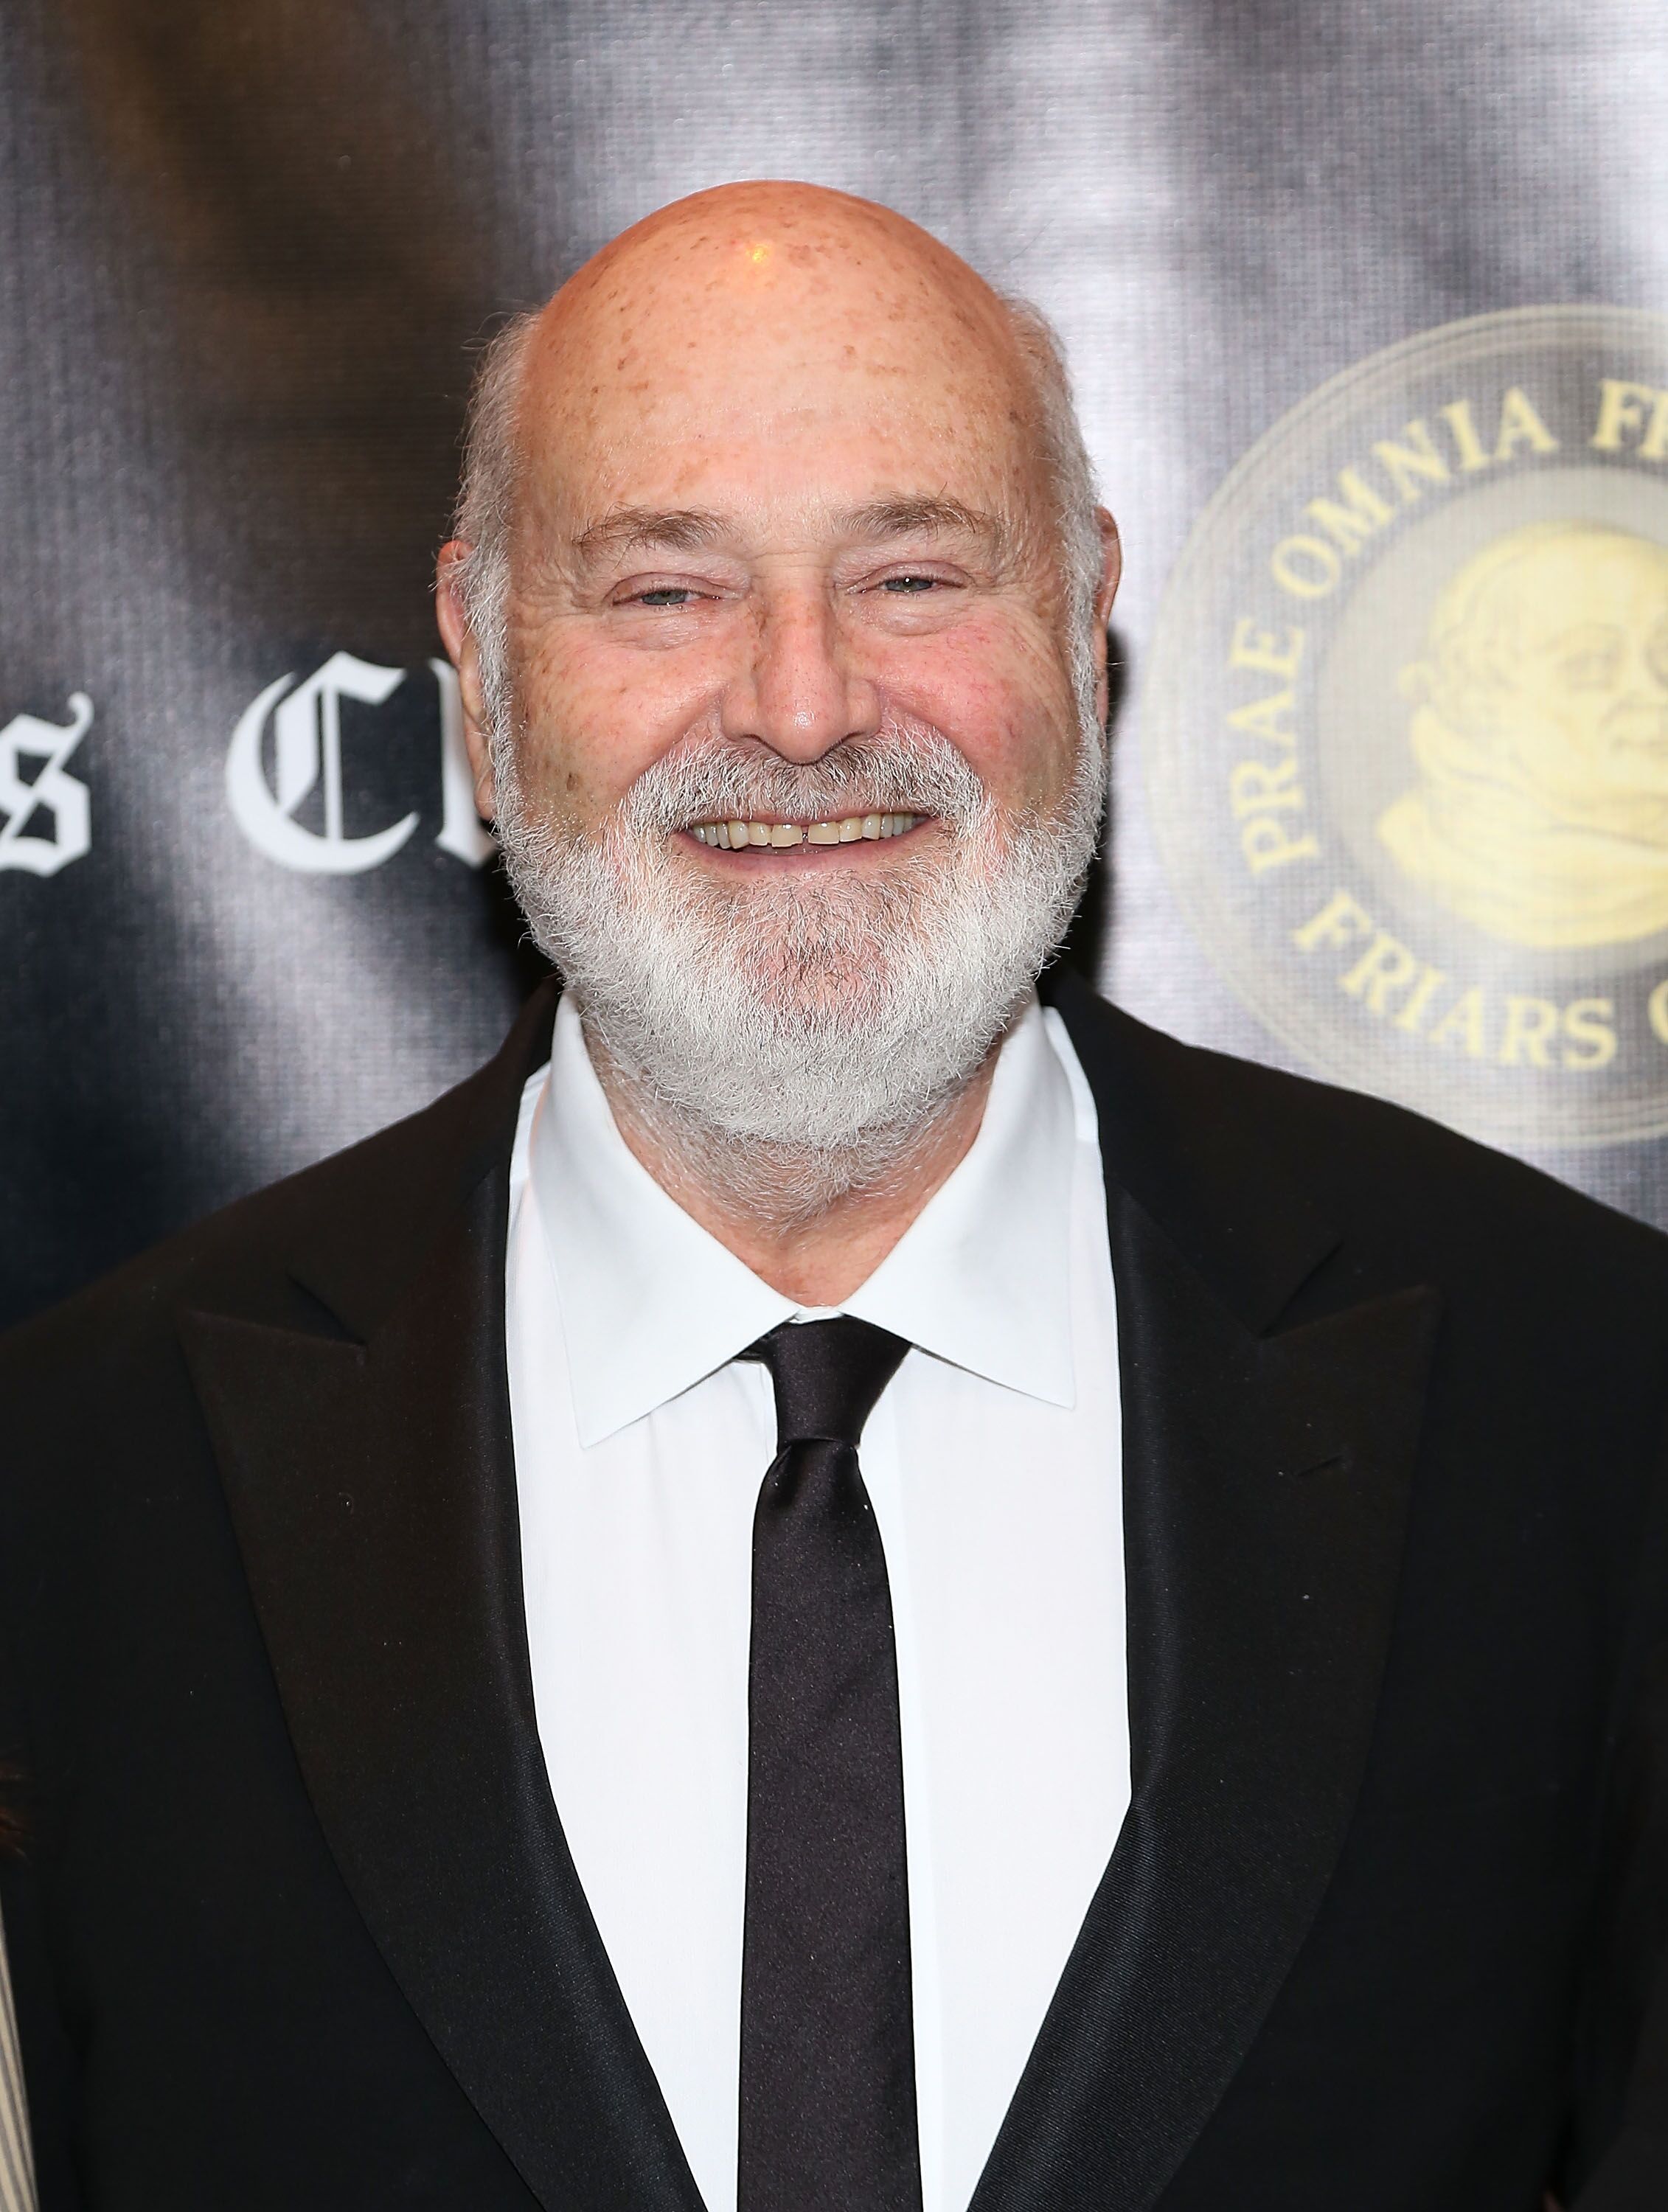 Rob Reiner at the Friar's Club Entertainment Icon Award on November 12, 2018. | Source: Getty Images